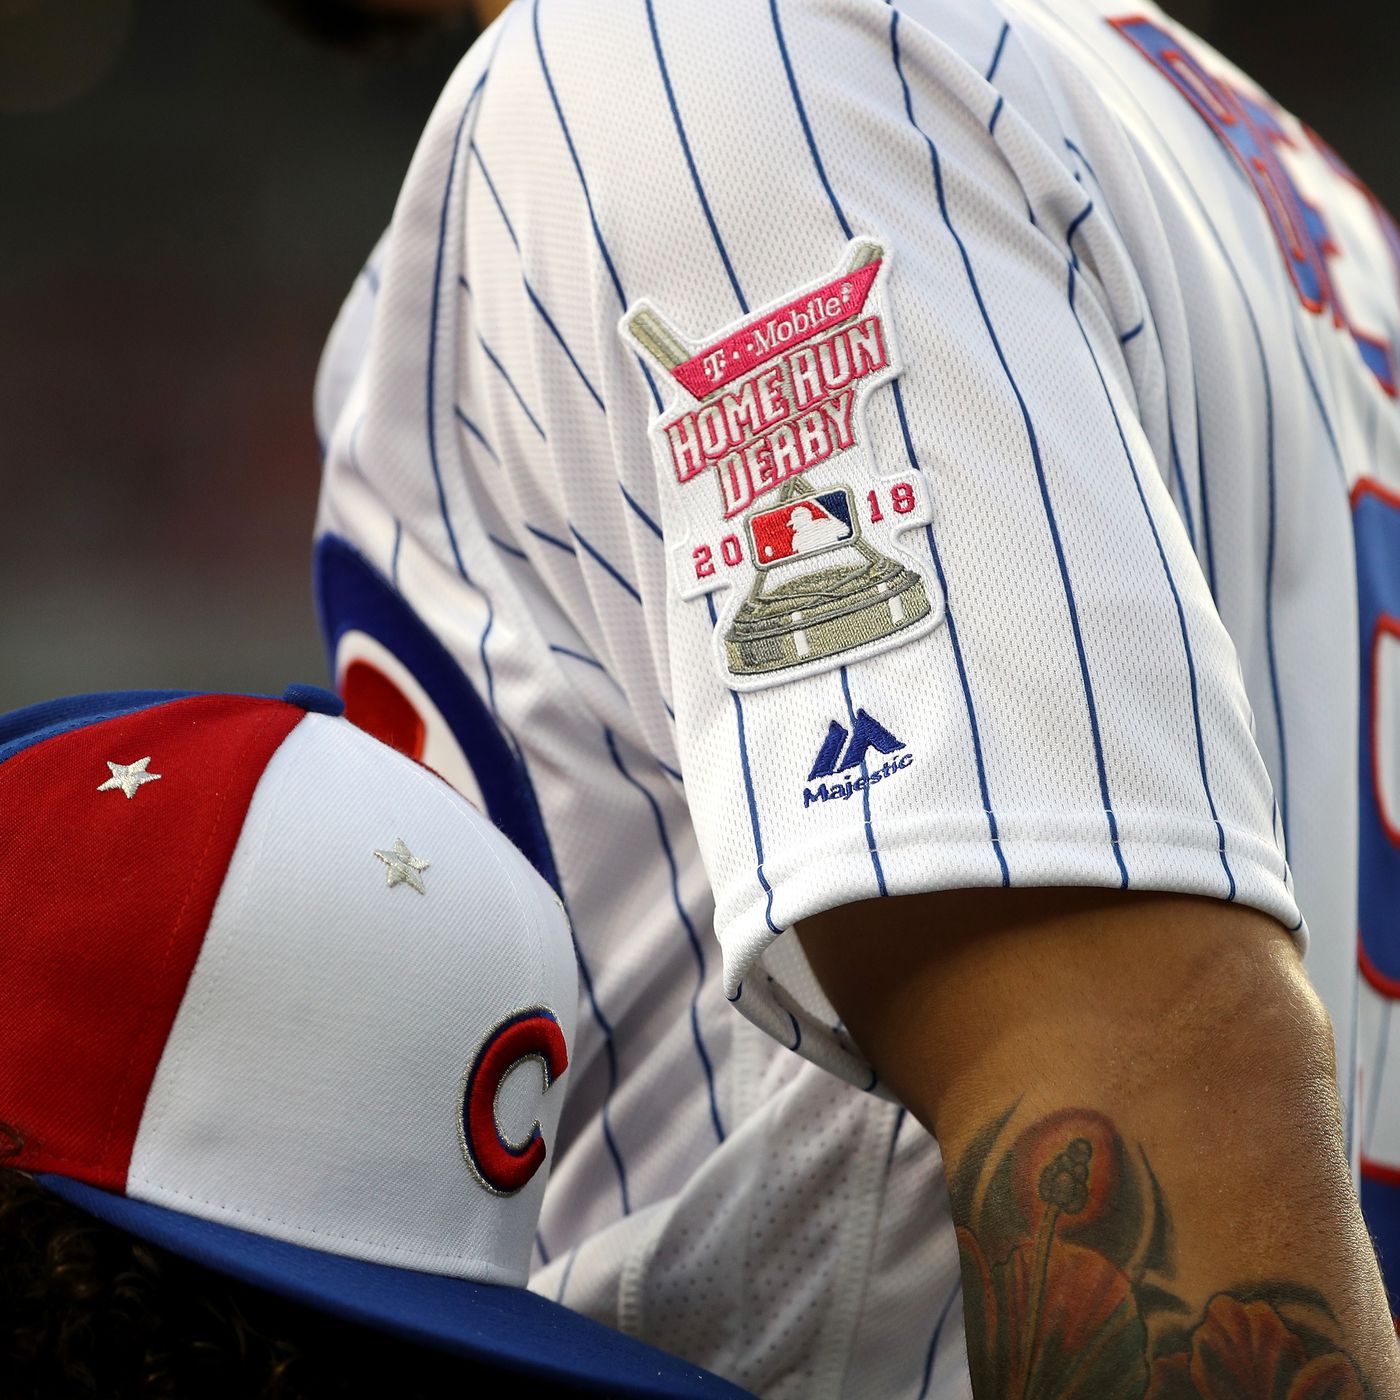 Patch attached to the sleeve of a baseball uniform